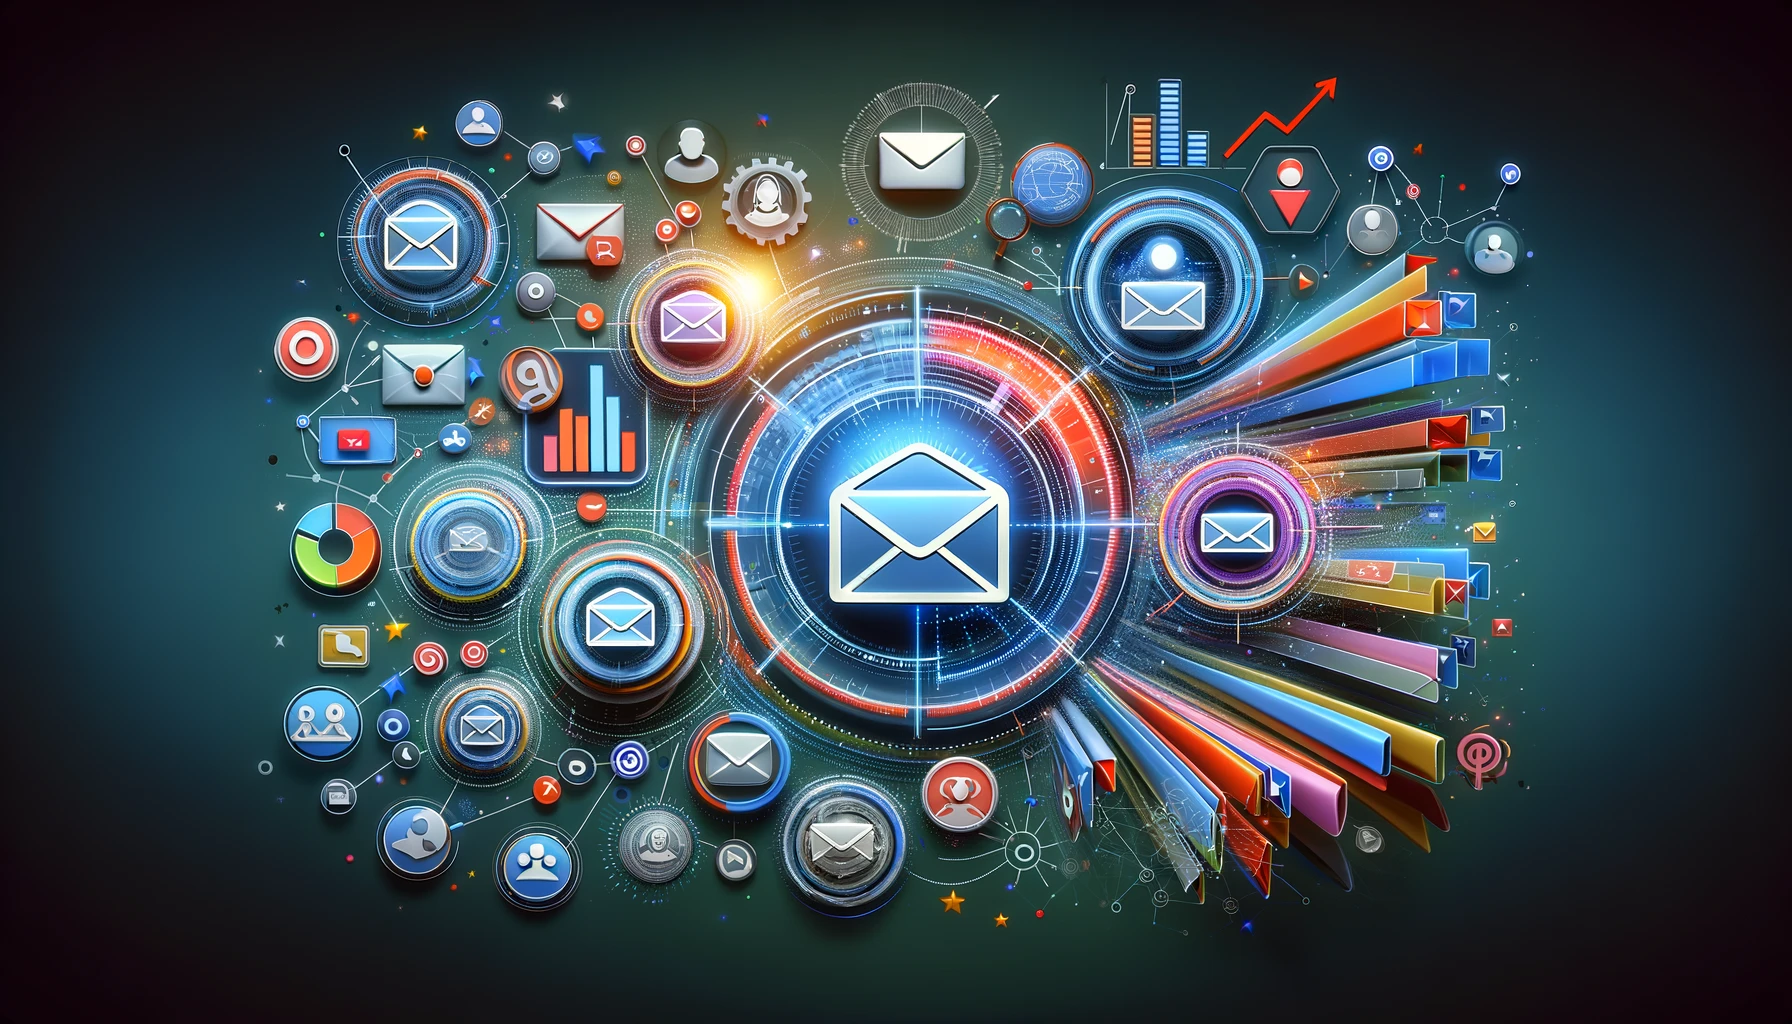 Abstract representation showing individual email envelopes tailored to different audience segments, surrounded by icons of analytics and personal preferences, symbolizing the dynamic world of Personalized Email Content.